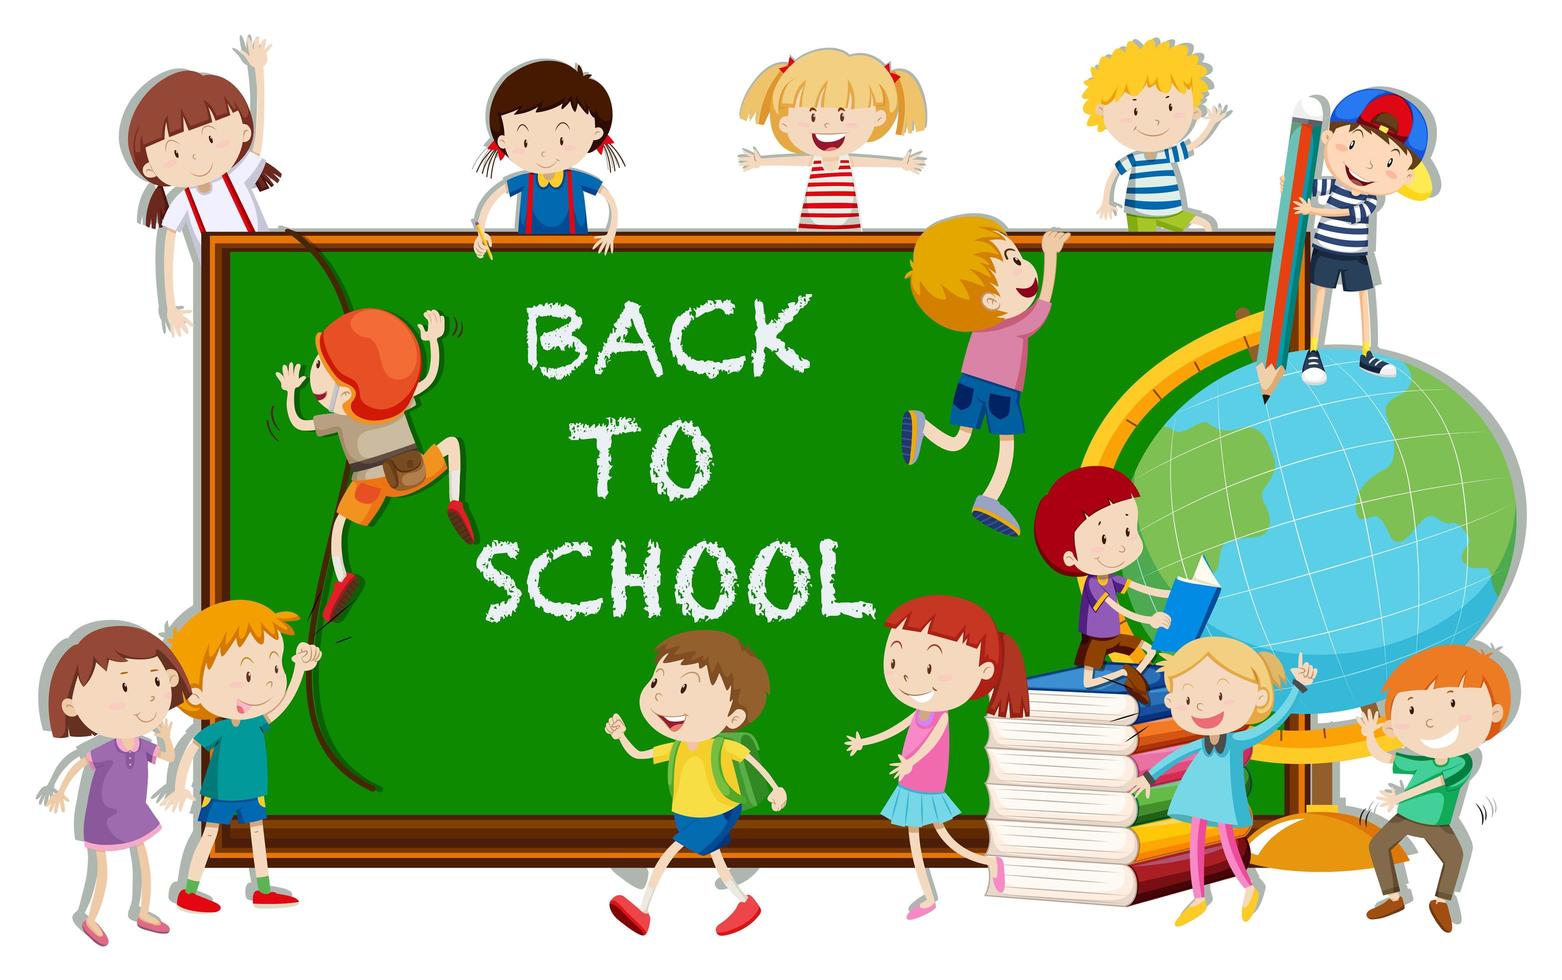 Back to school theme with kids and board vector